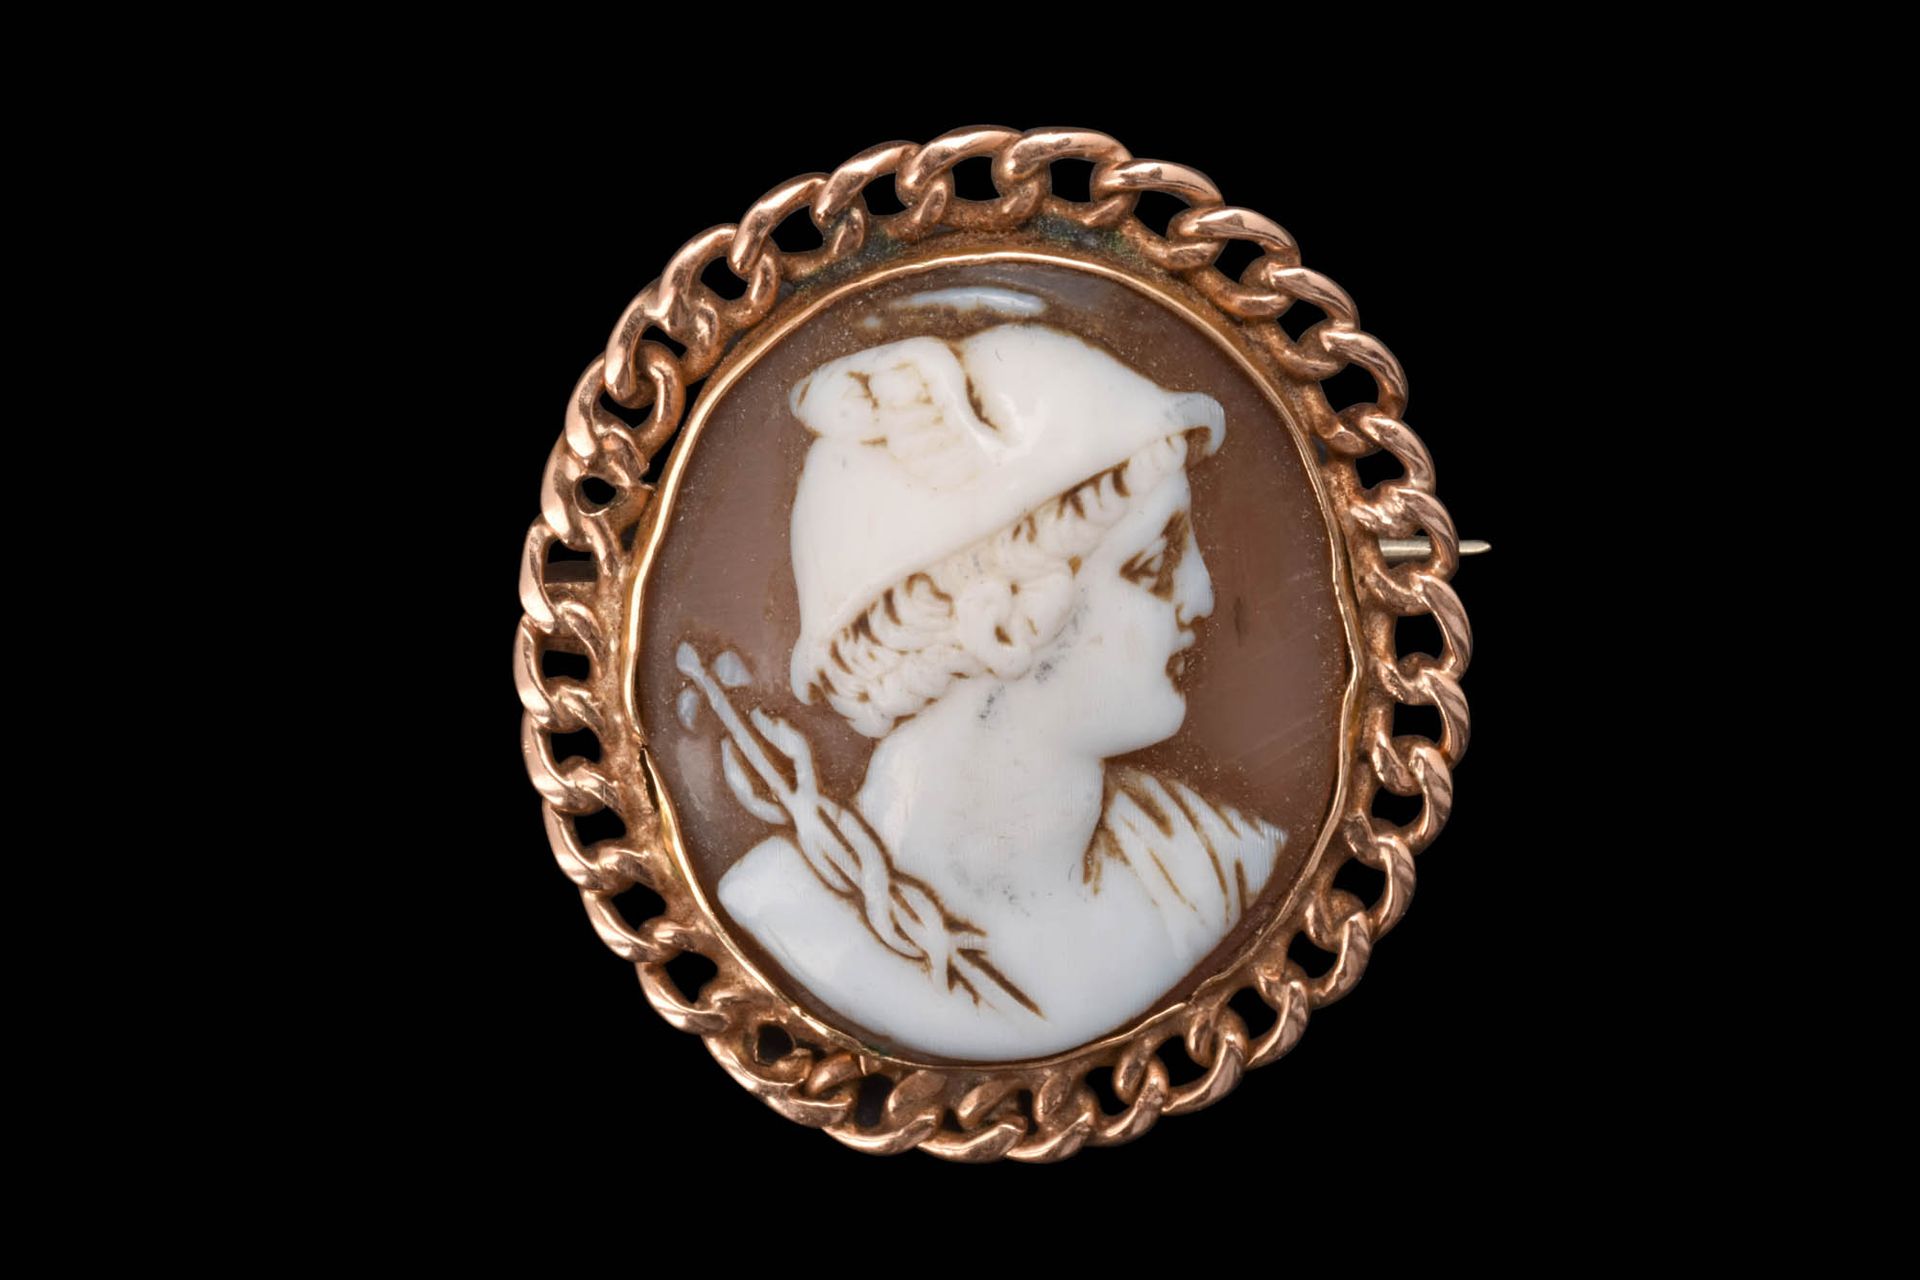 NEOCLASSICAL GOLD BROOCH WITH HERMES CAMEO Ca. AD 1700 - 1800.
Auffallende Kamee&hellip;